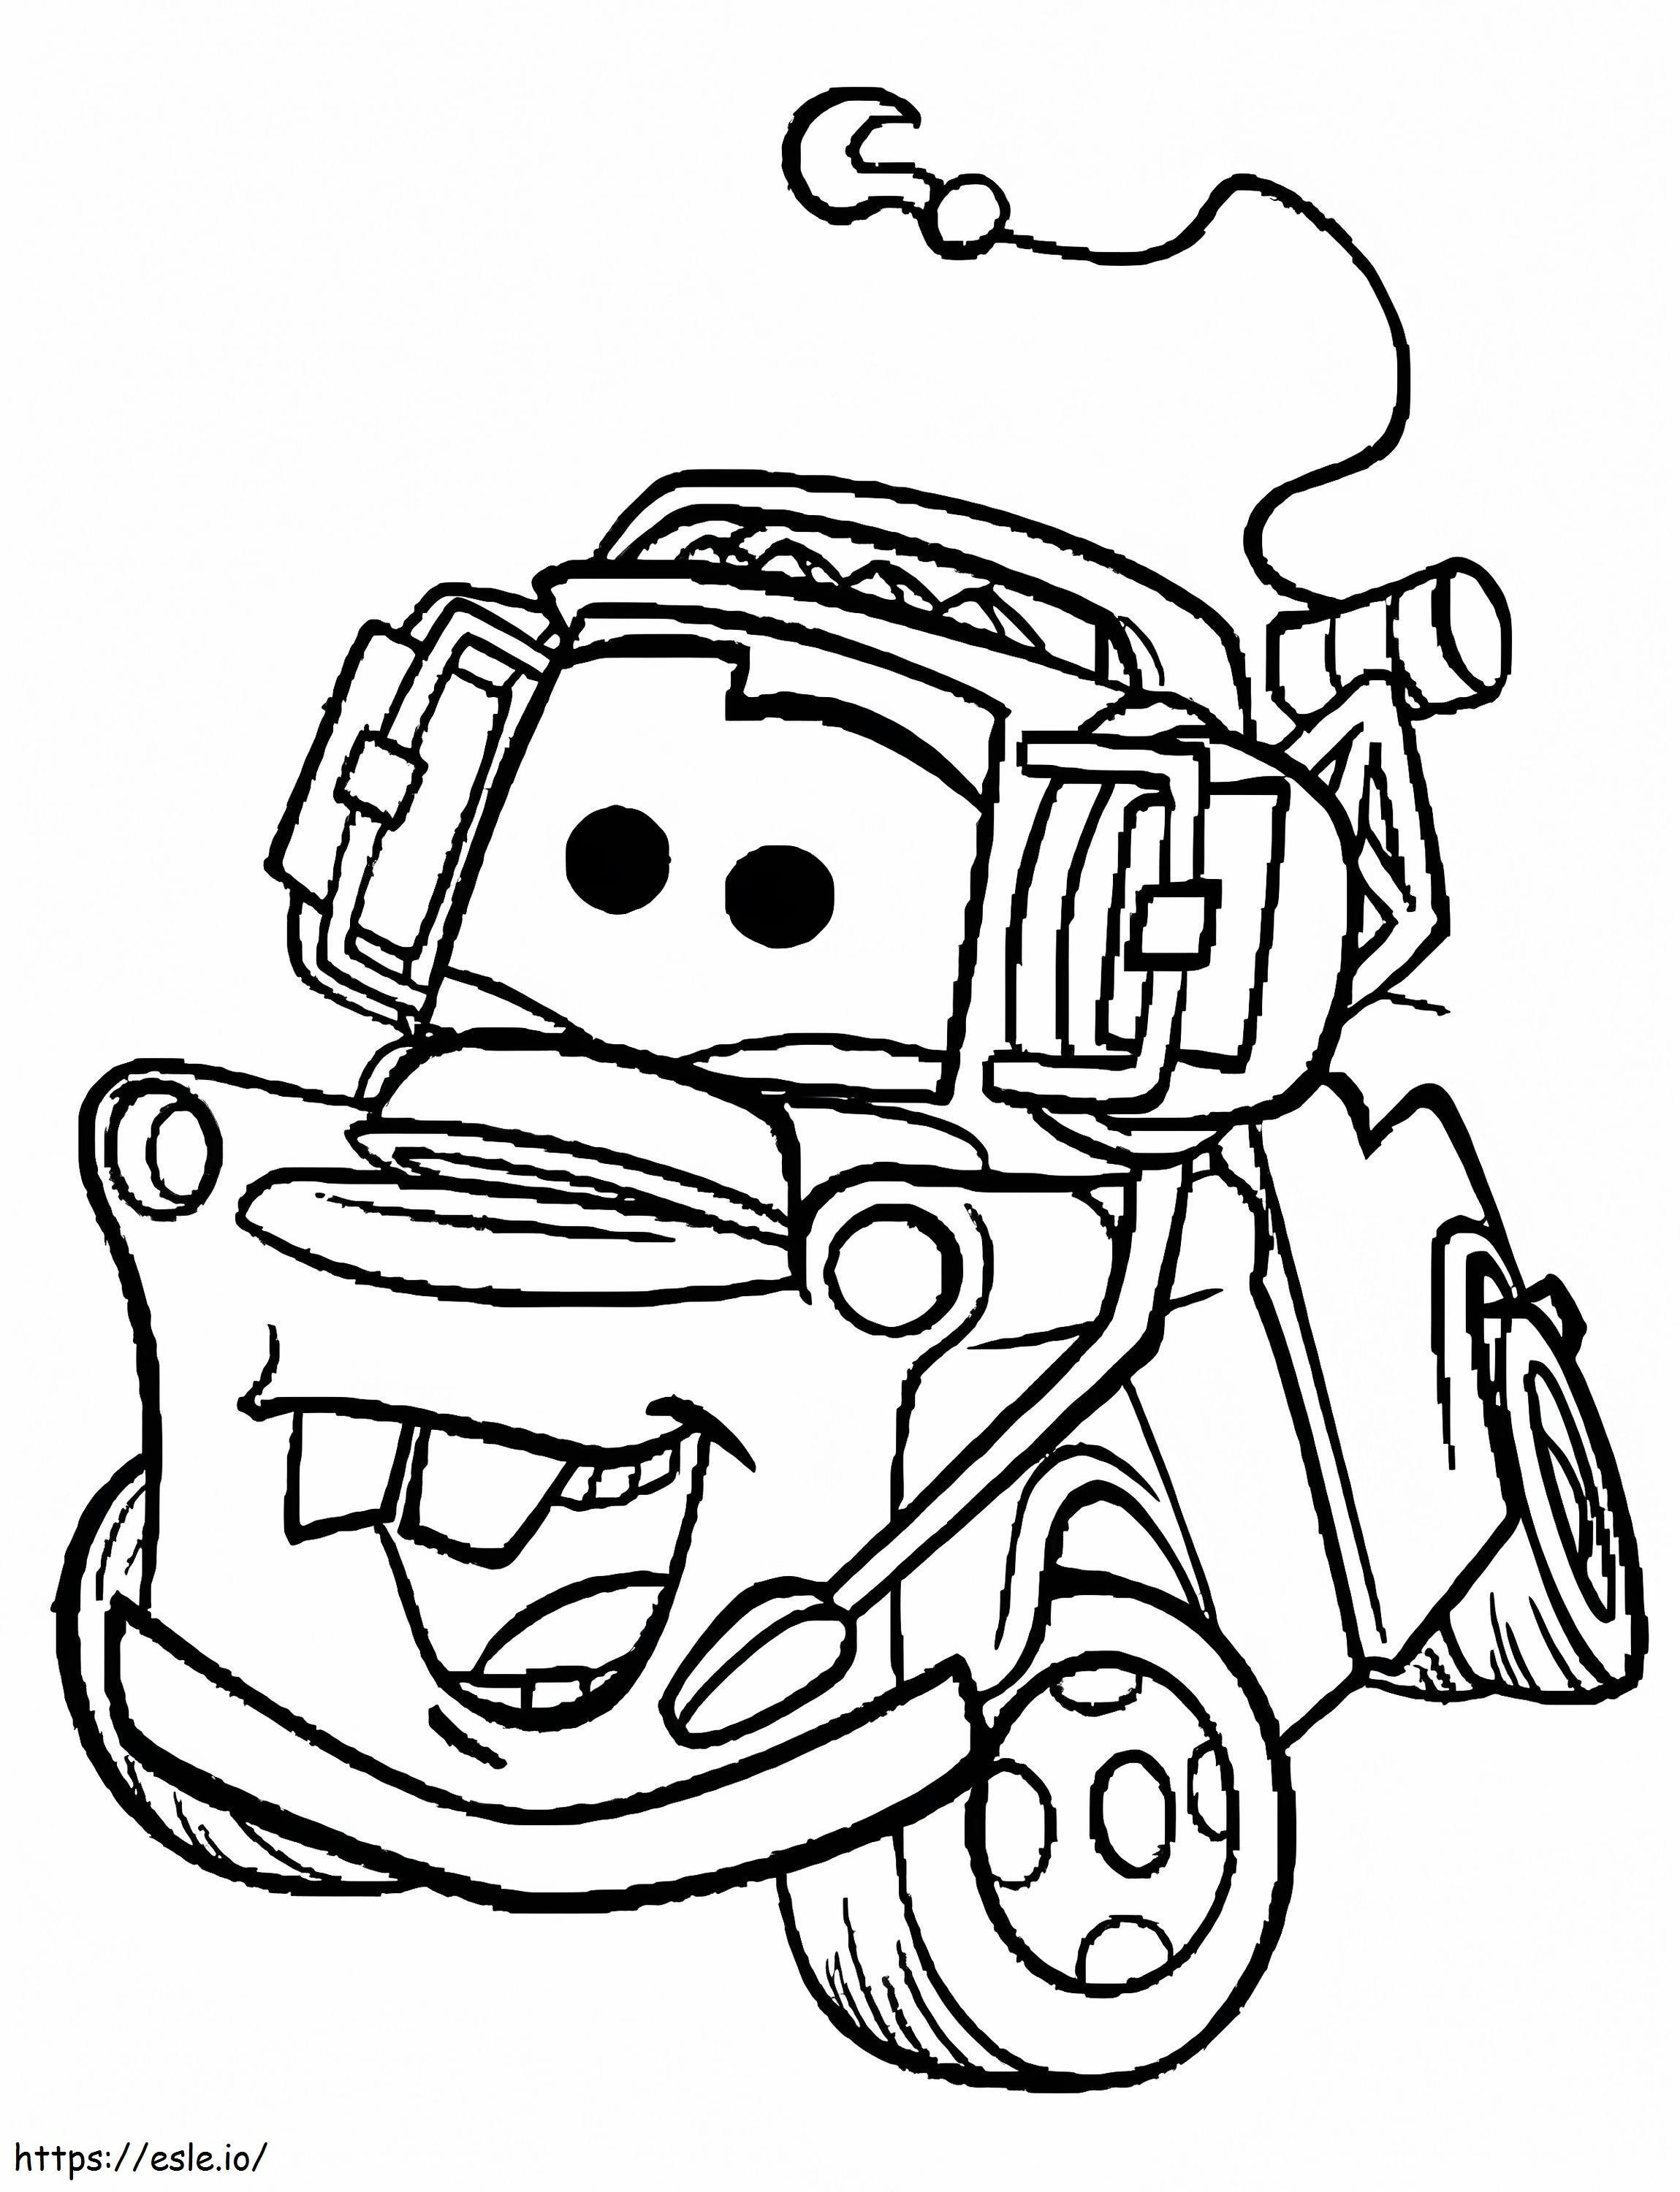 Free Tow Mater coloring page